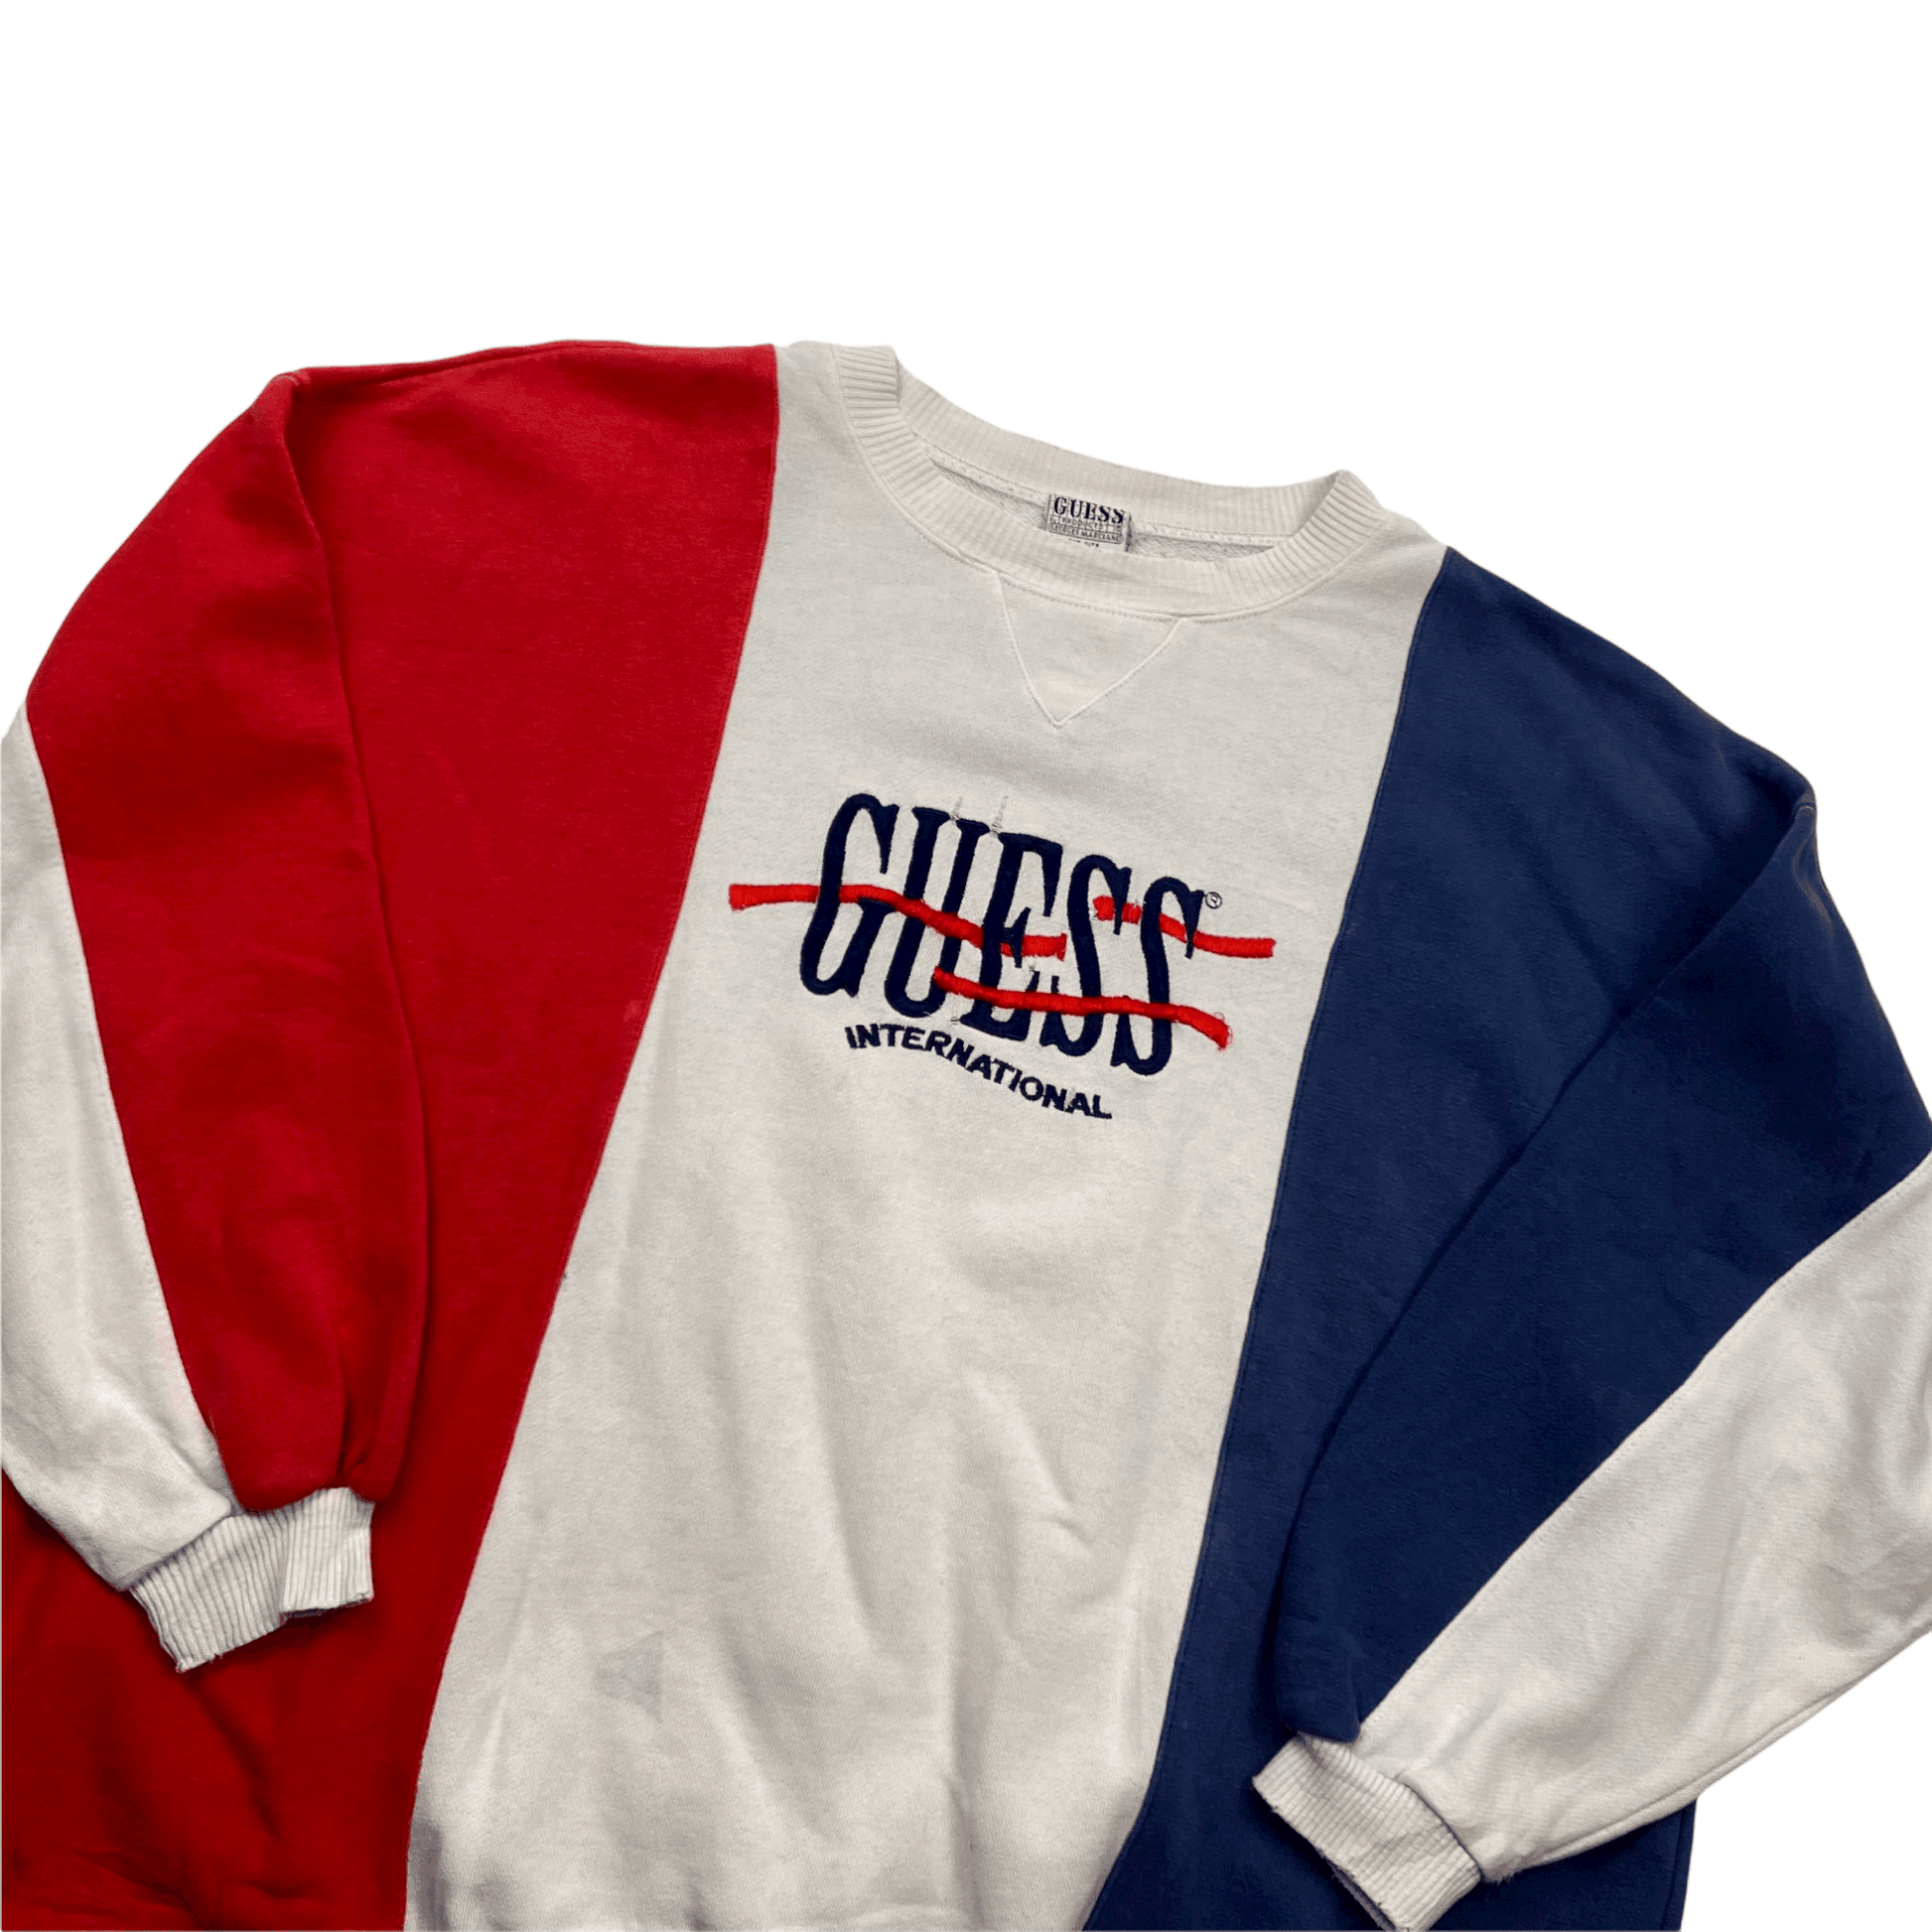 Vintage 90s White, Blue + Red Guess Jeans Spell-Out Sweatshirt - Medium - The Streetwear Studio